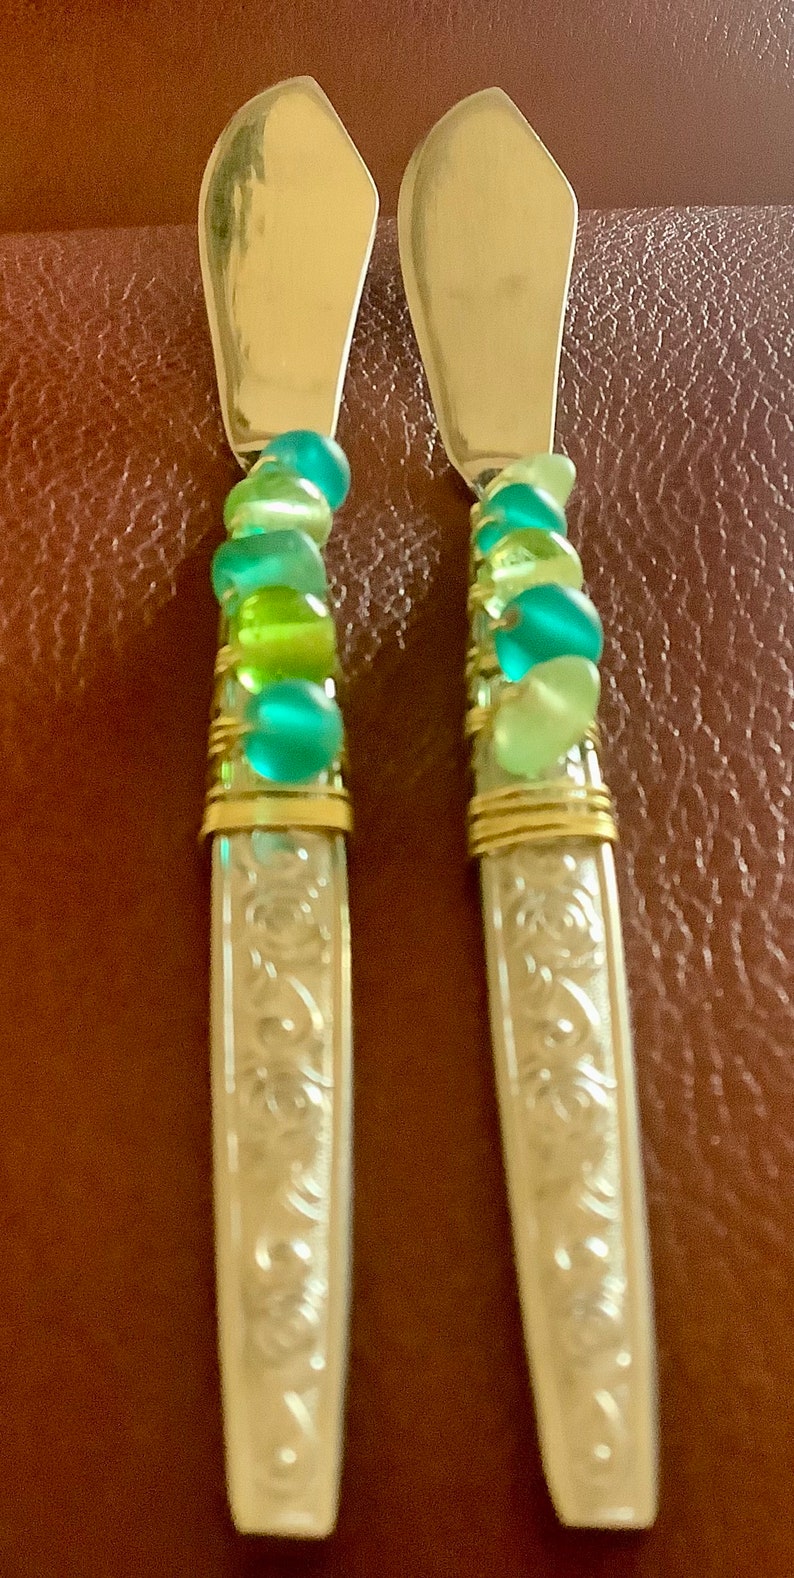 Beaded Flatware Cheese Spreaders Blue and Green Beads Serving Utensils Set of 2 image 4